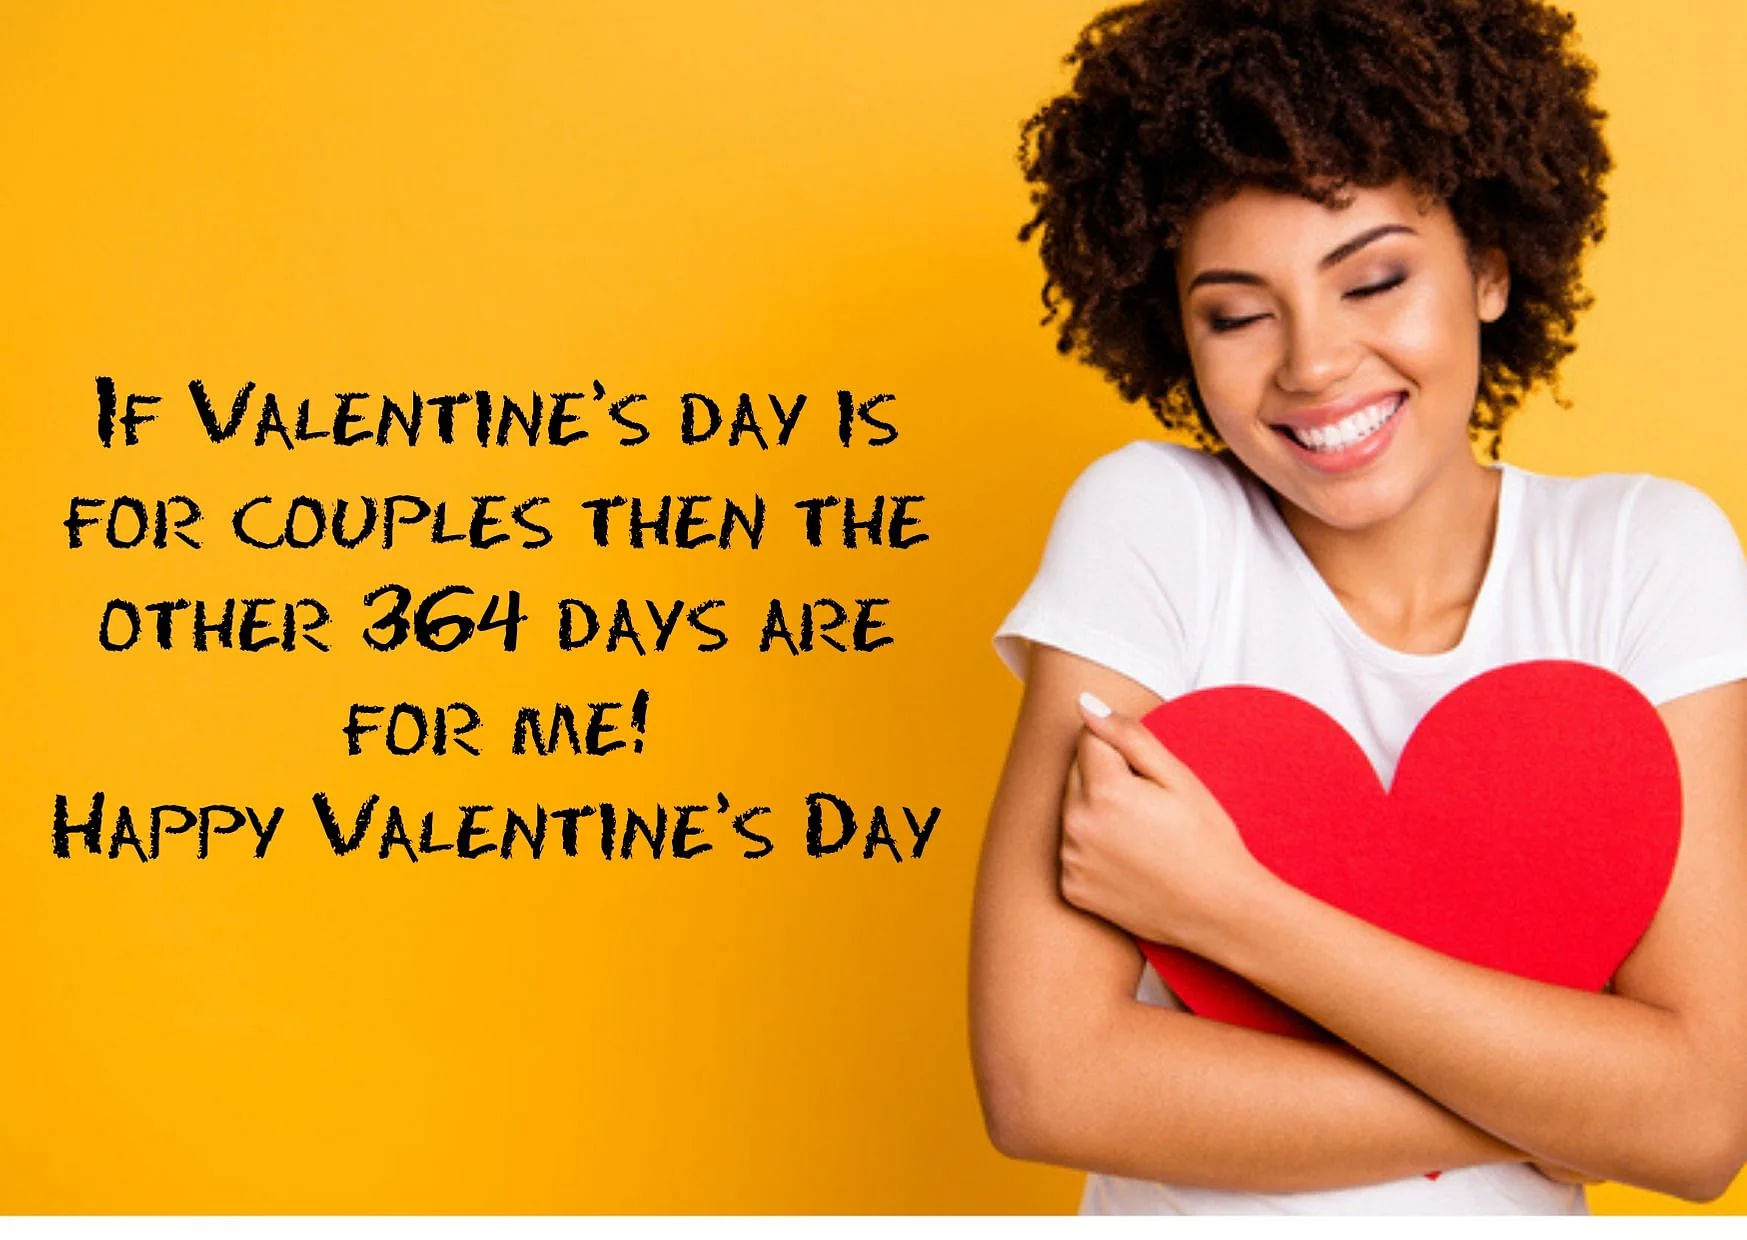 Happy Valentine's Day 2020 Quotes For Singles. Valentine Day Funny Memes,  Quotes, Images and Cards For Singles on valentine's day.